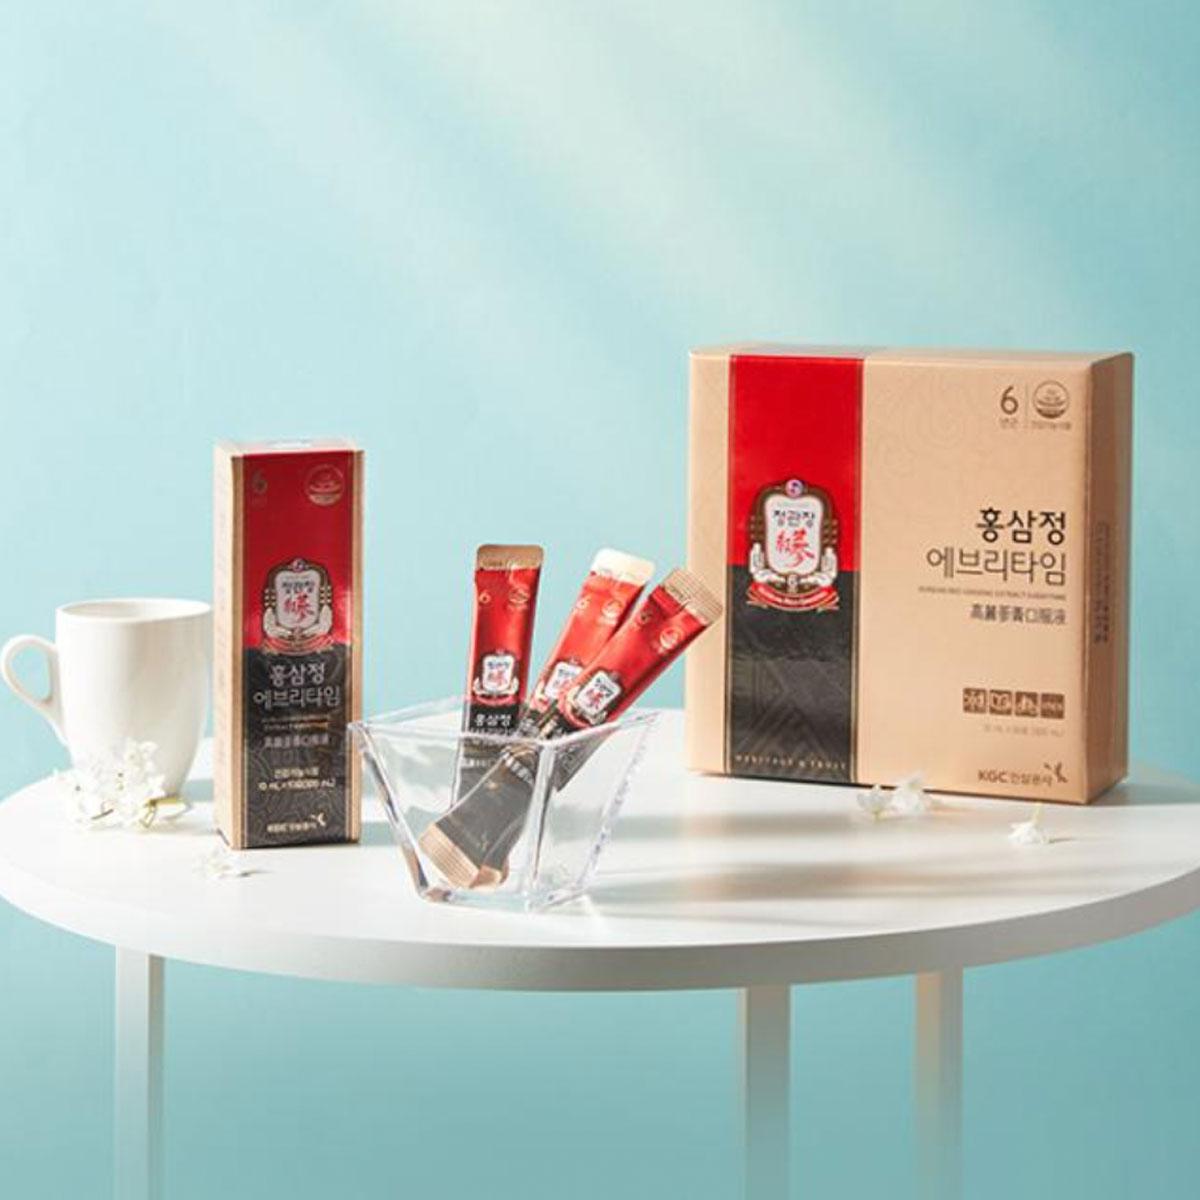 korean brand cheong kwan jang red ginseng extract everytime set on display with blue background 